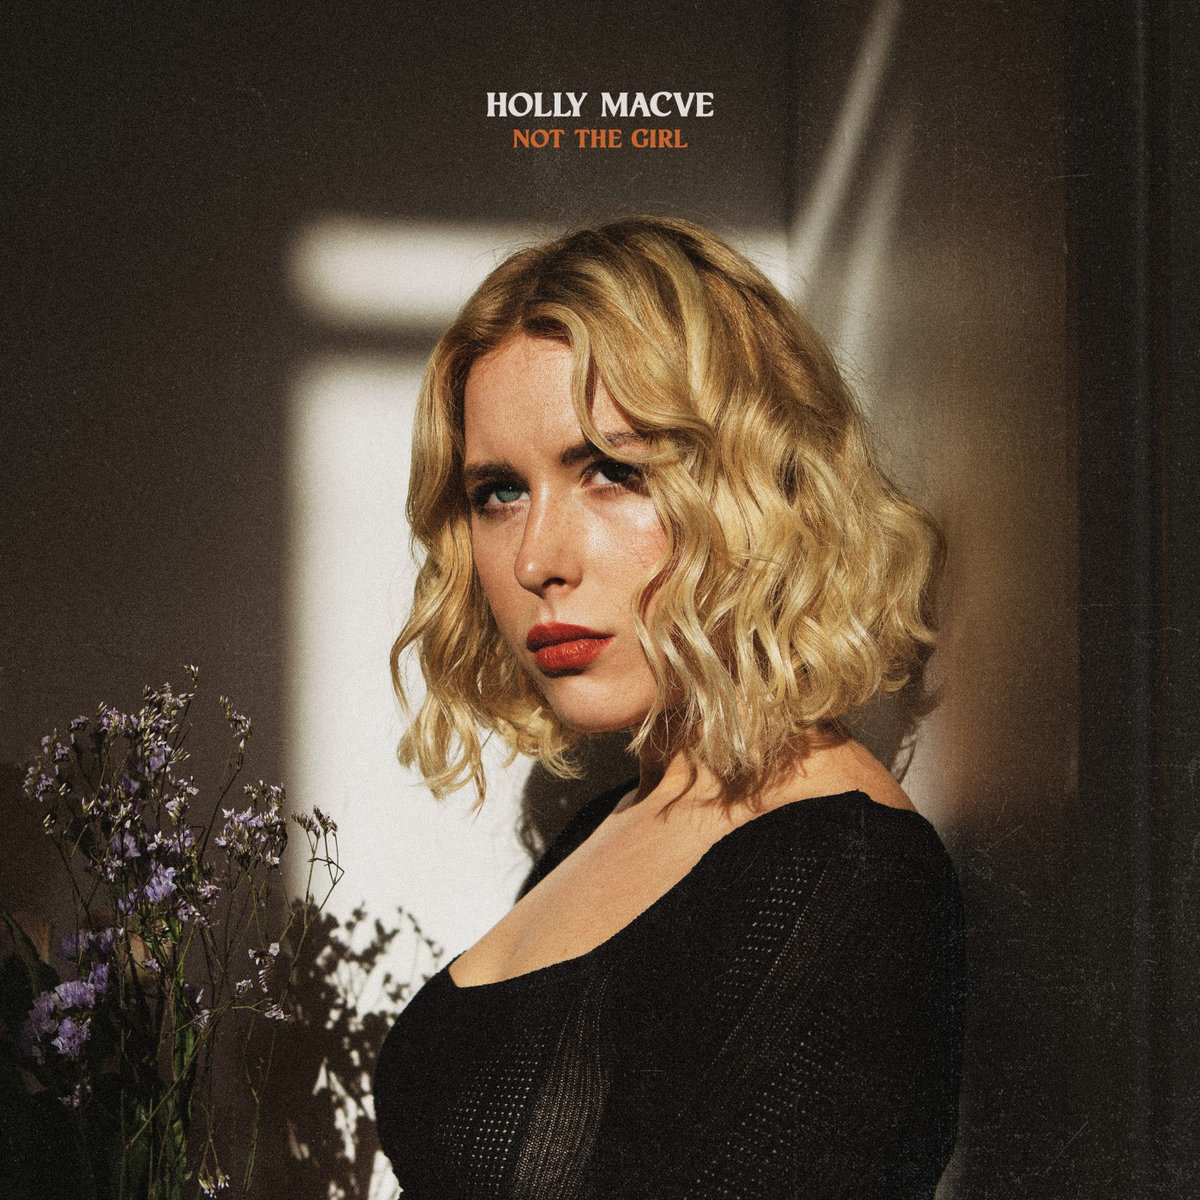 RECORD OF THE WEEK//Holly Macve – Not The Girl